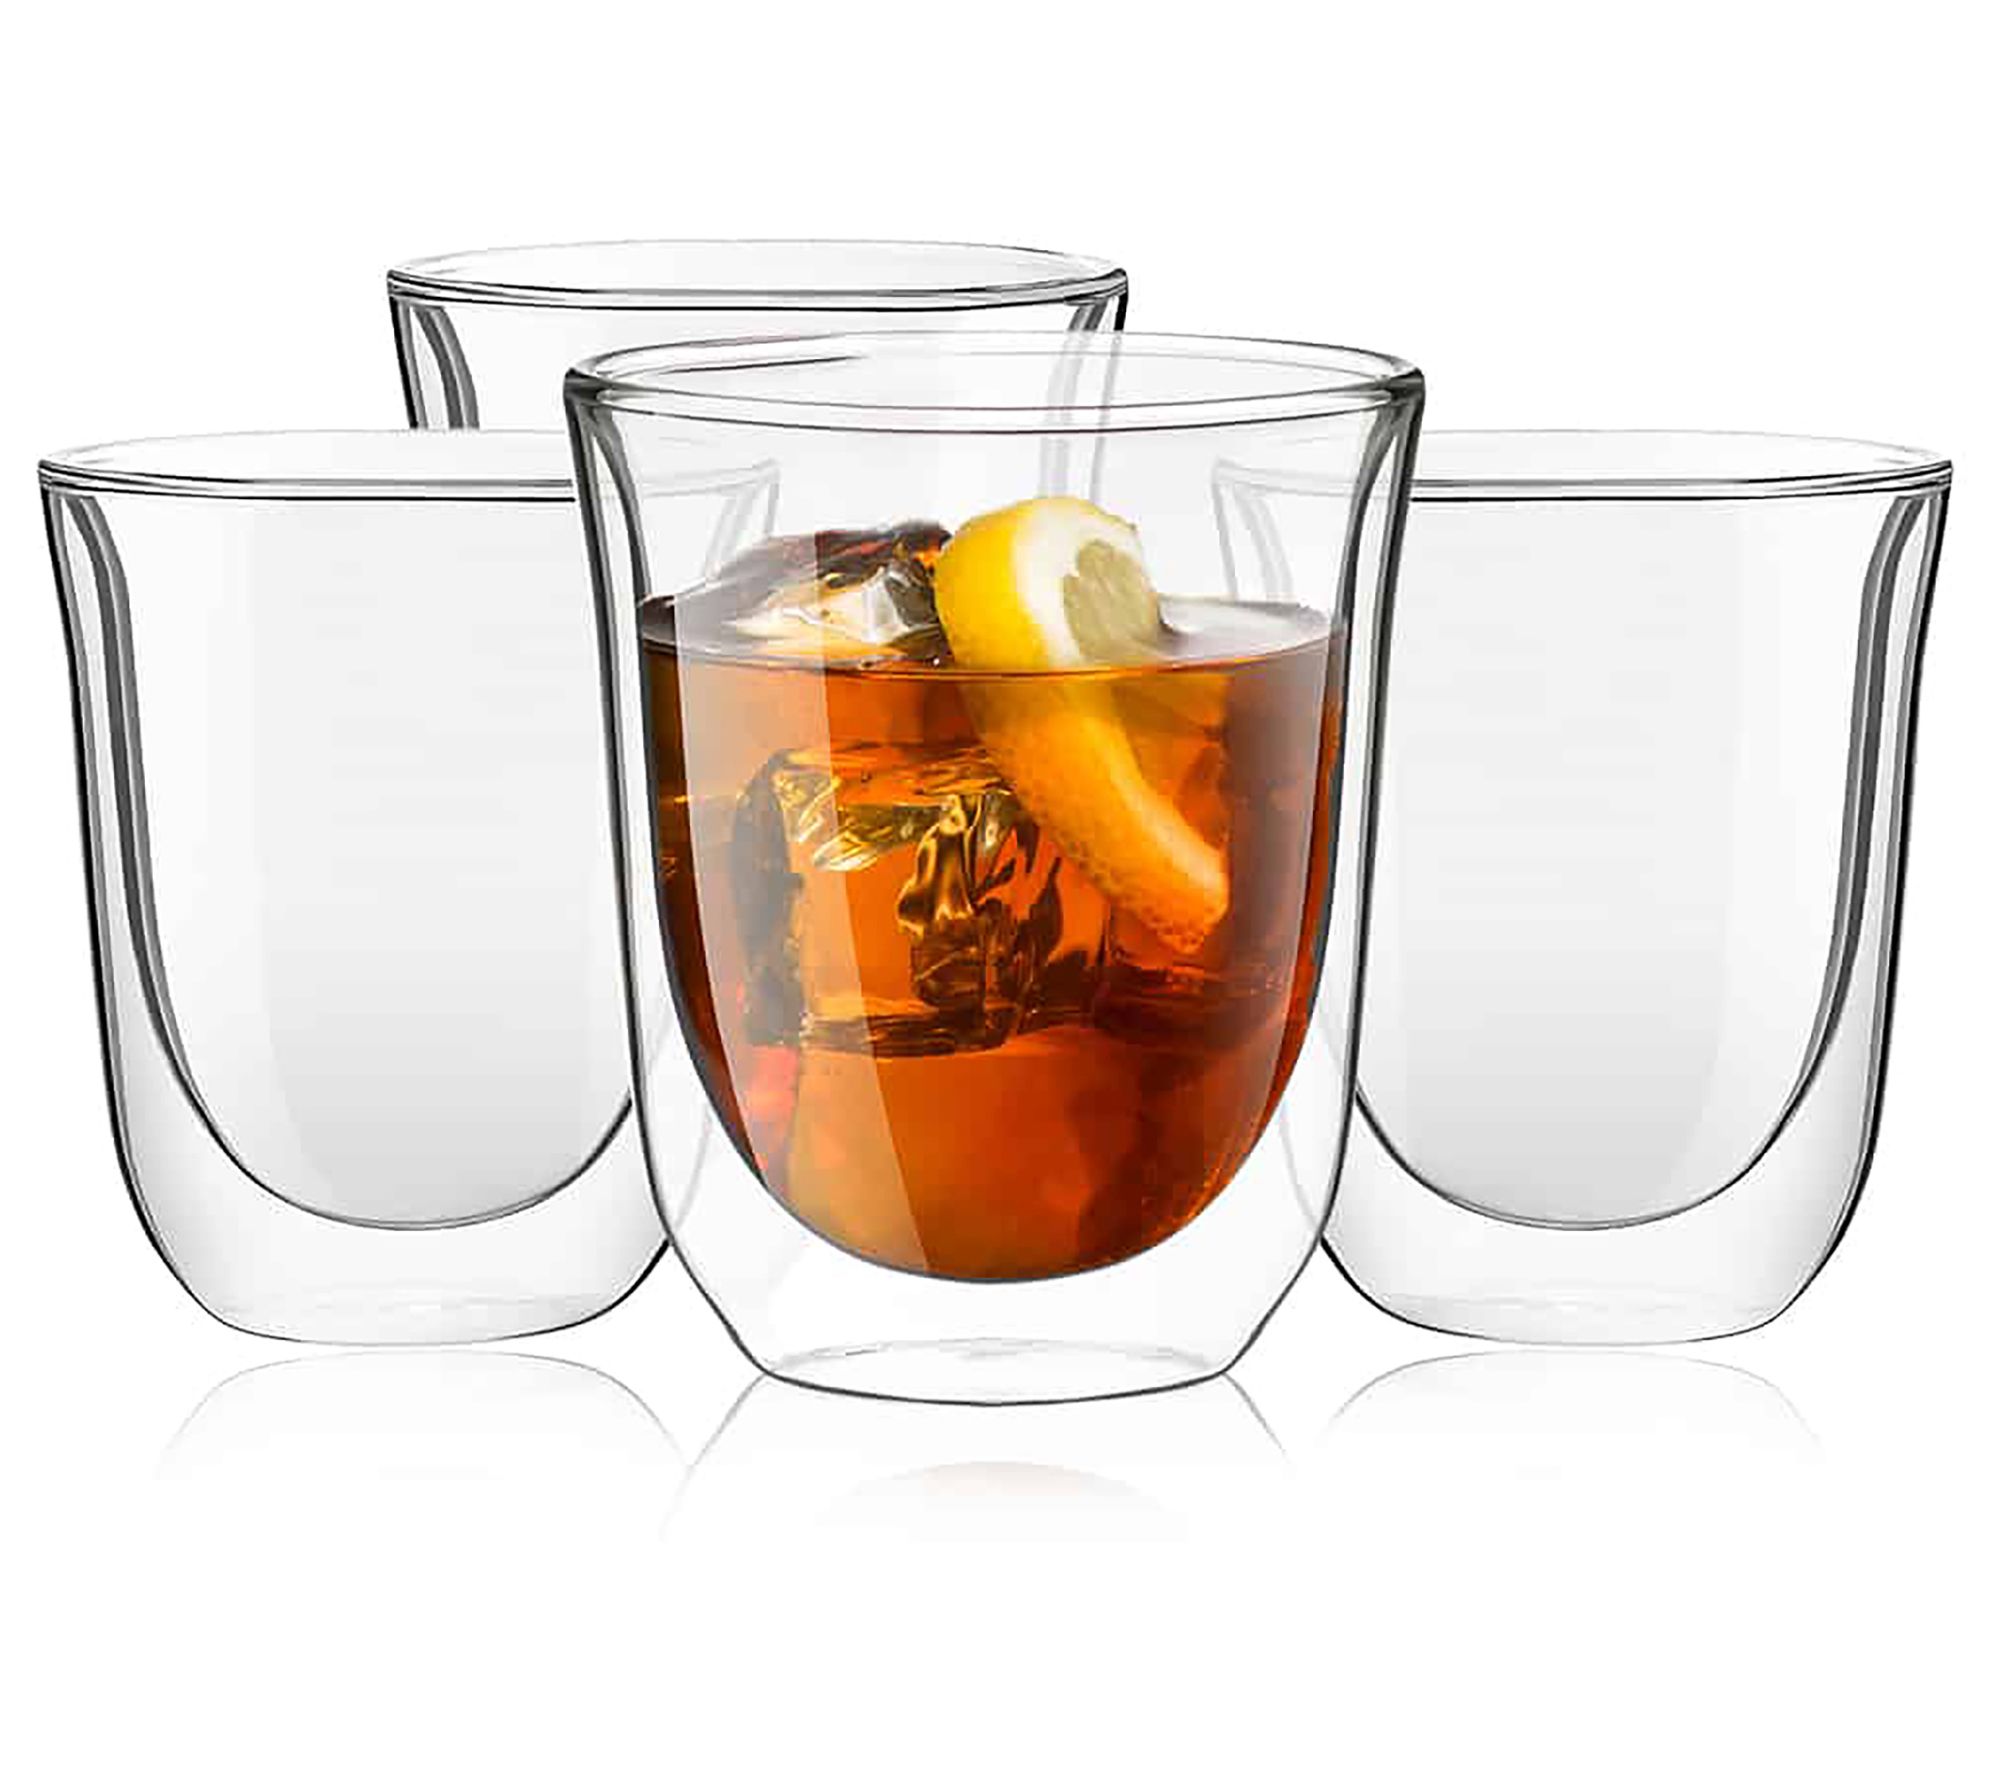 Levitea Double Wall Insulated Glasses - 8.4 oz- Set of 4 